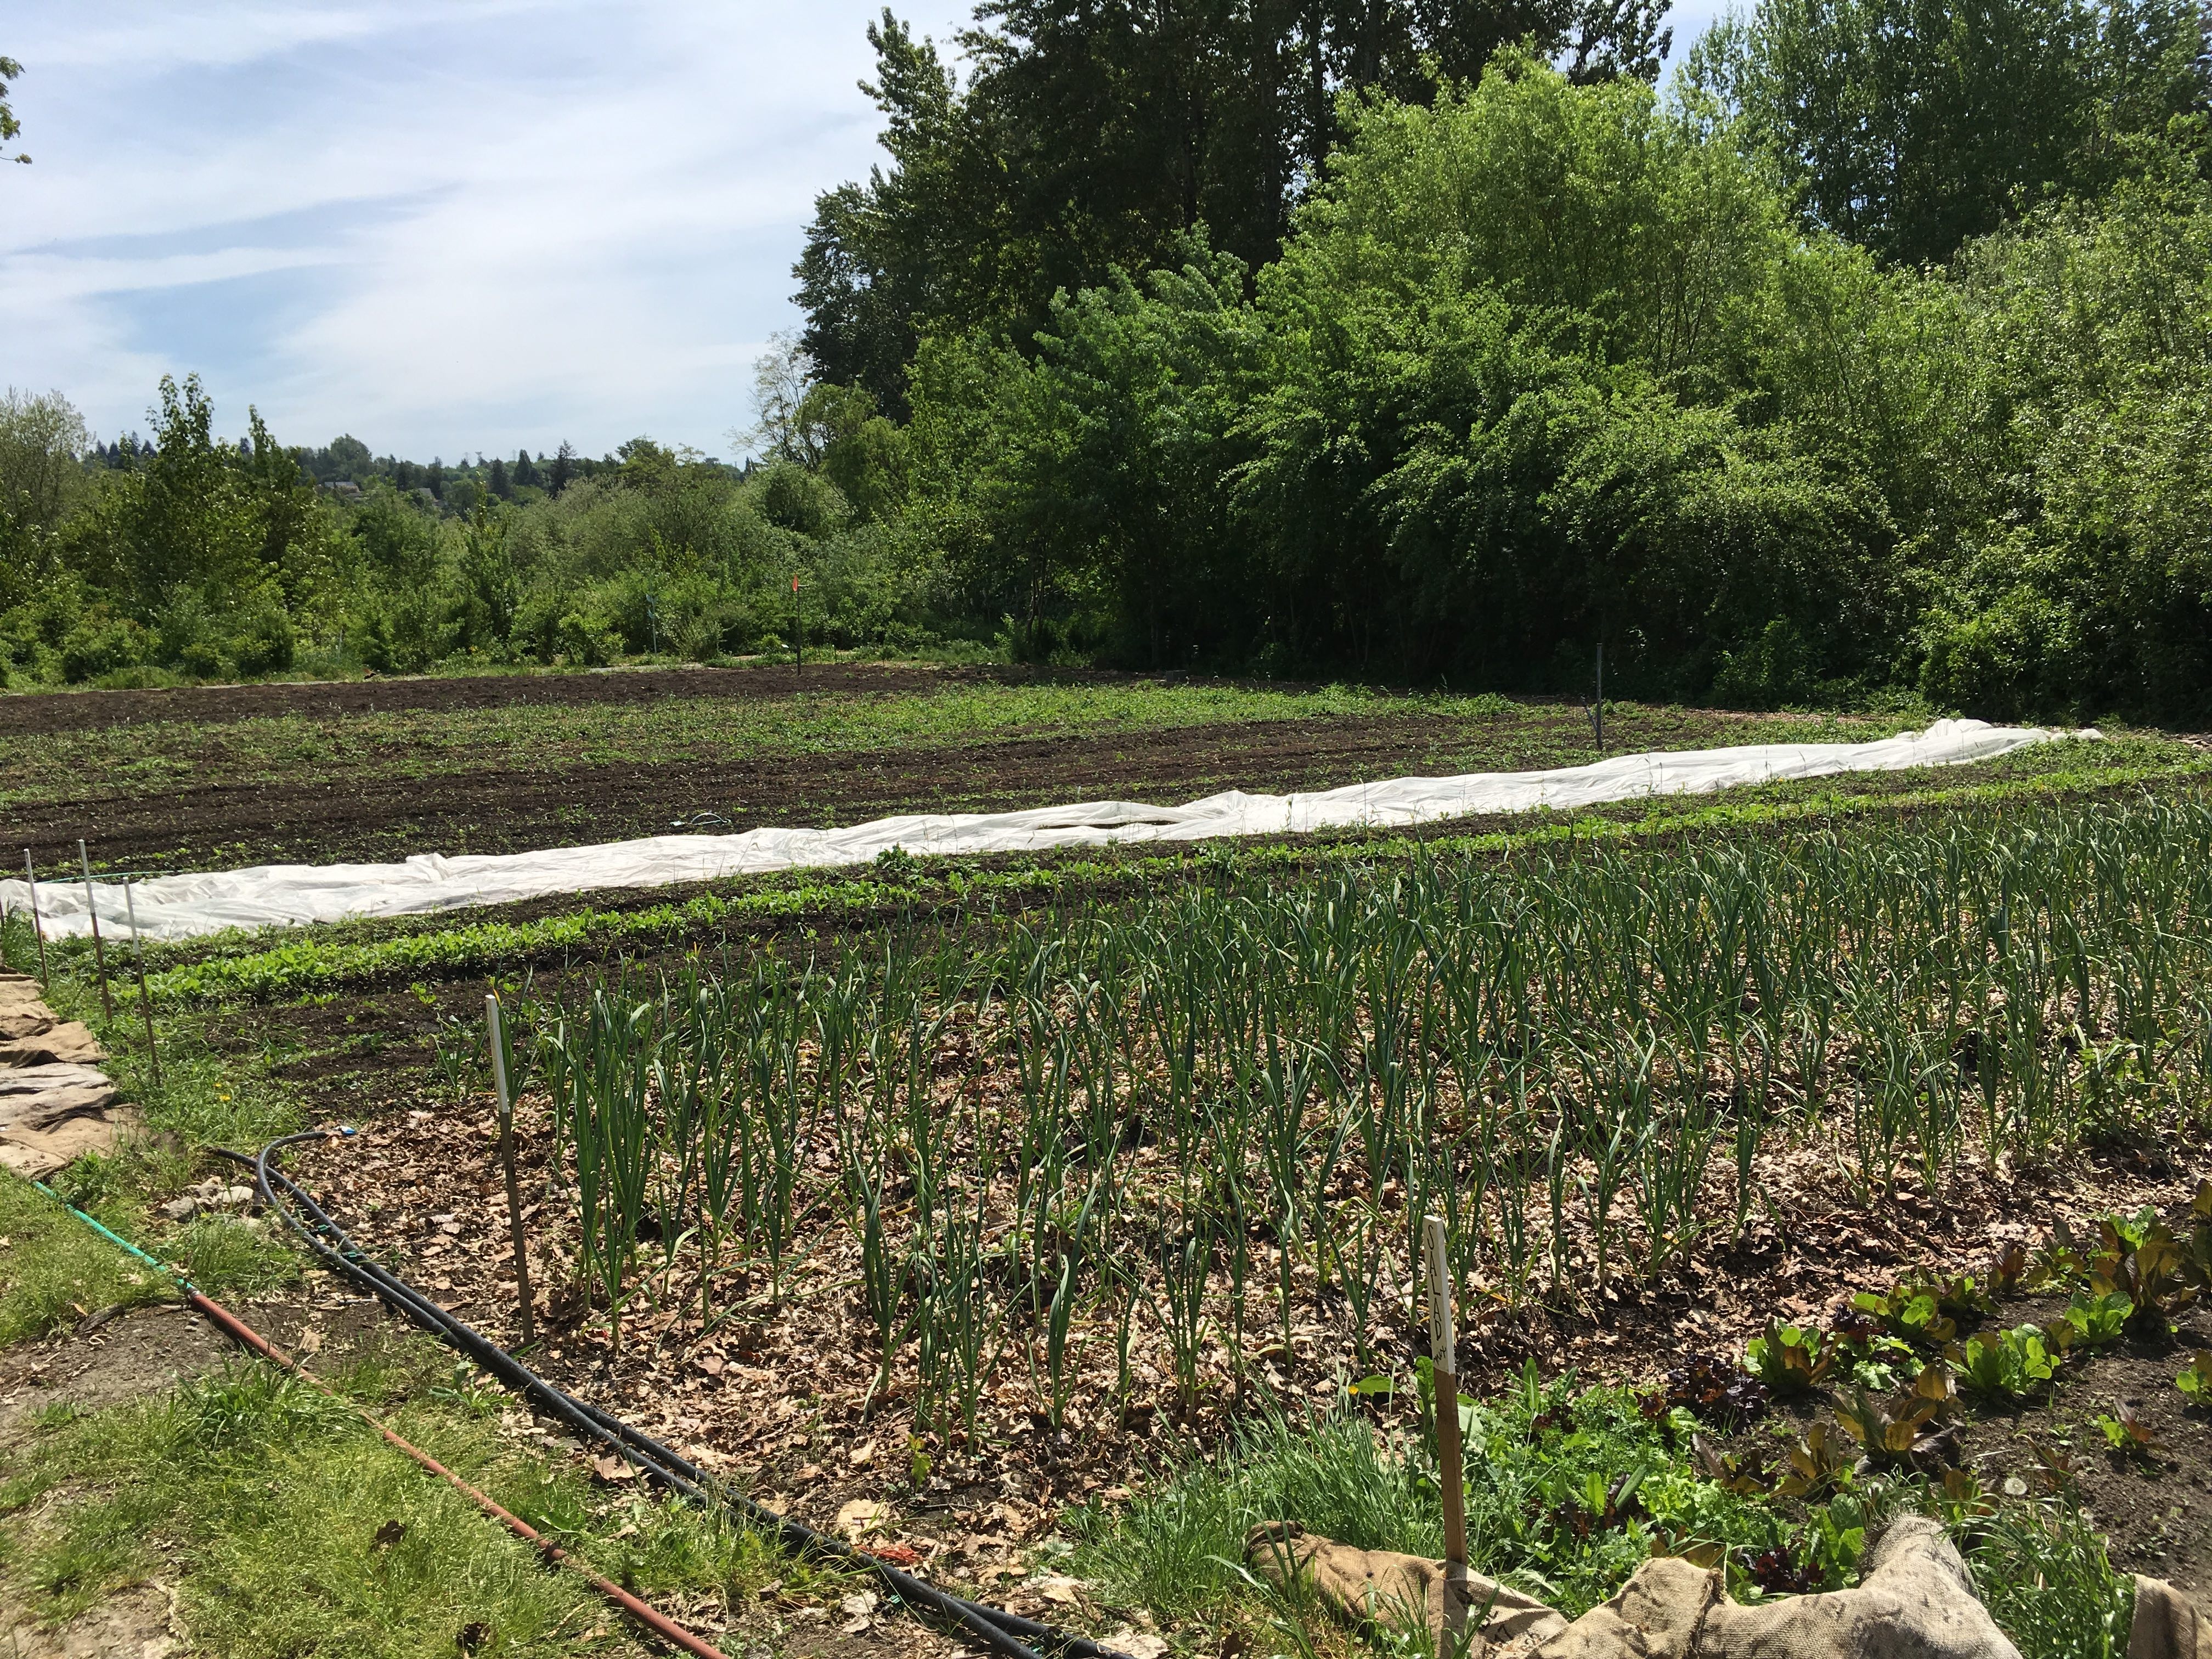 The Tilth Farm in 2019 - leeks, lettuces, and other veggies